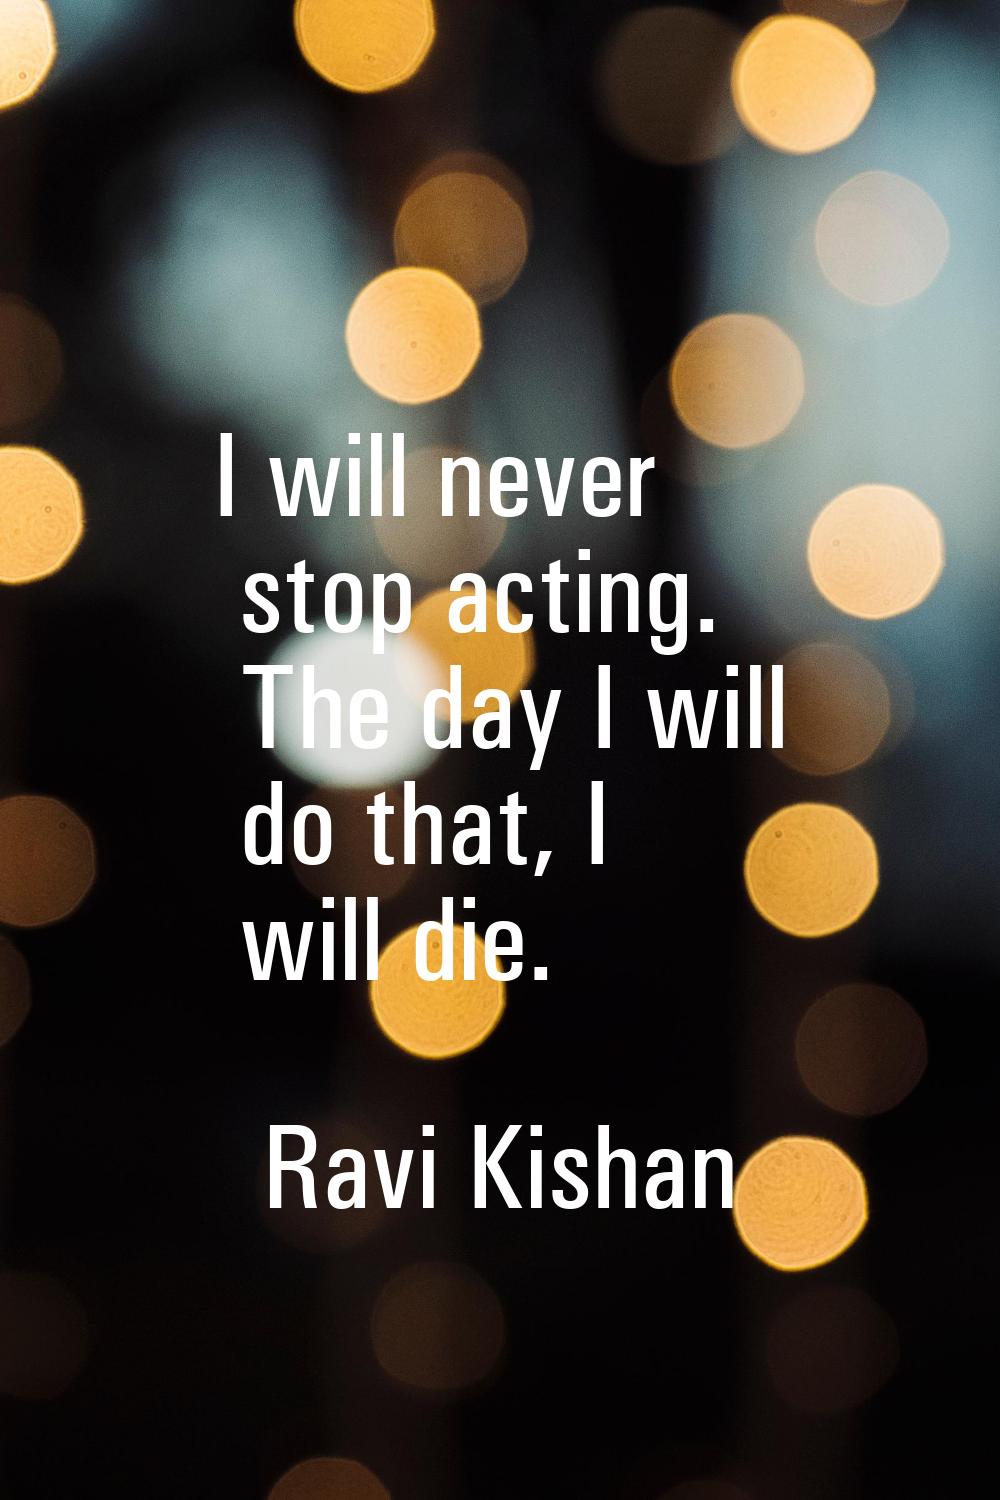 I will never stop acting. The day I will do that, I will die.